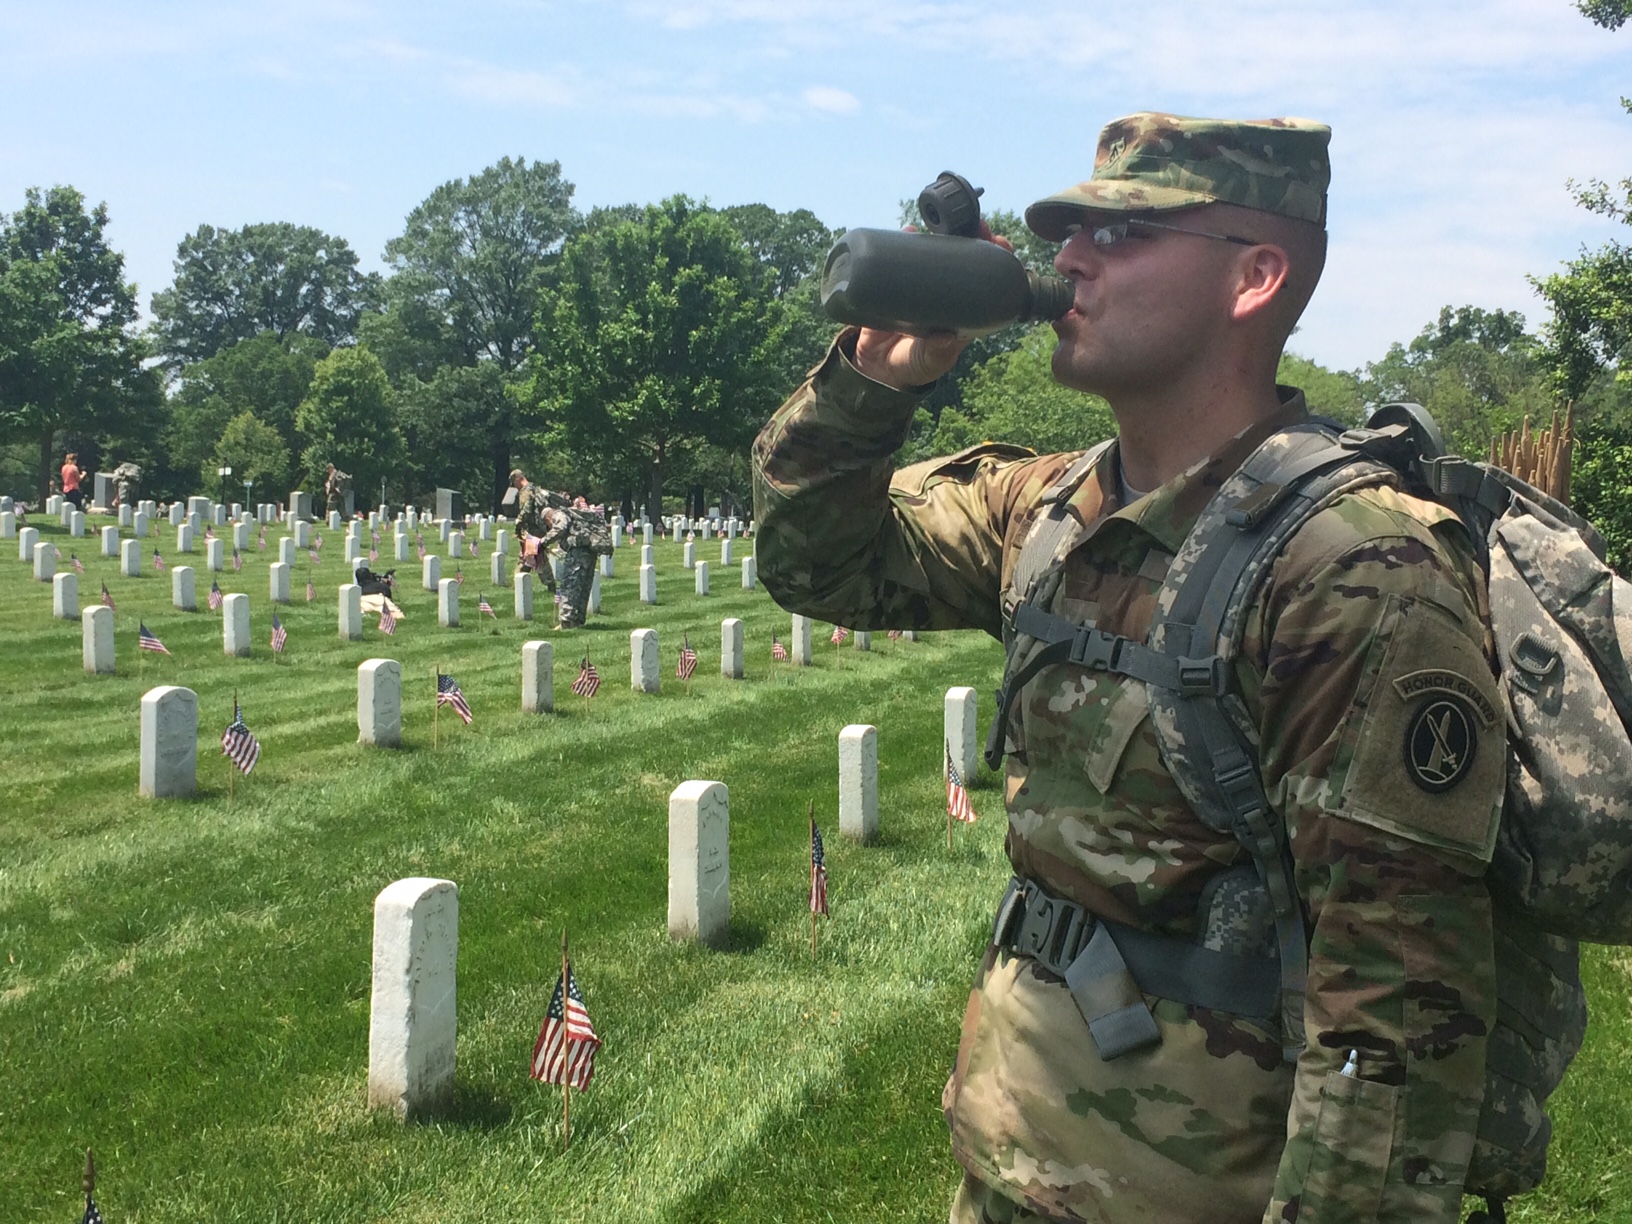 A soldier takes a drink of water during the annual "Flags-In" event on Thursday, May 26, 2016 at Arlington National Cemetery. Soldiers spent 4 hours in 90-degree heat placing hundreds of thousands of American flags to honor fallen soldiers. (WTOP/Rachel Nania)